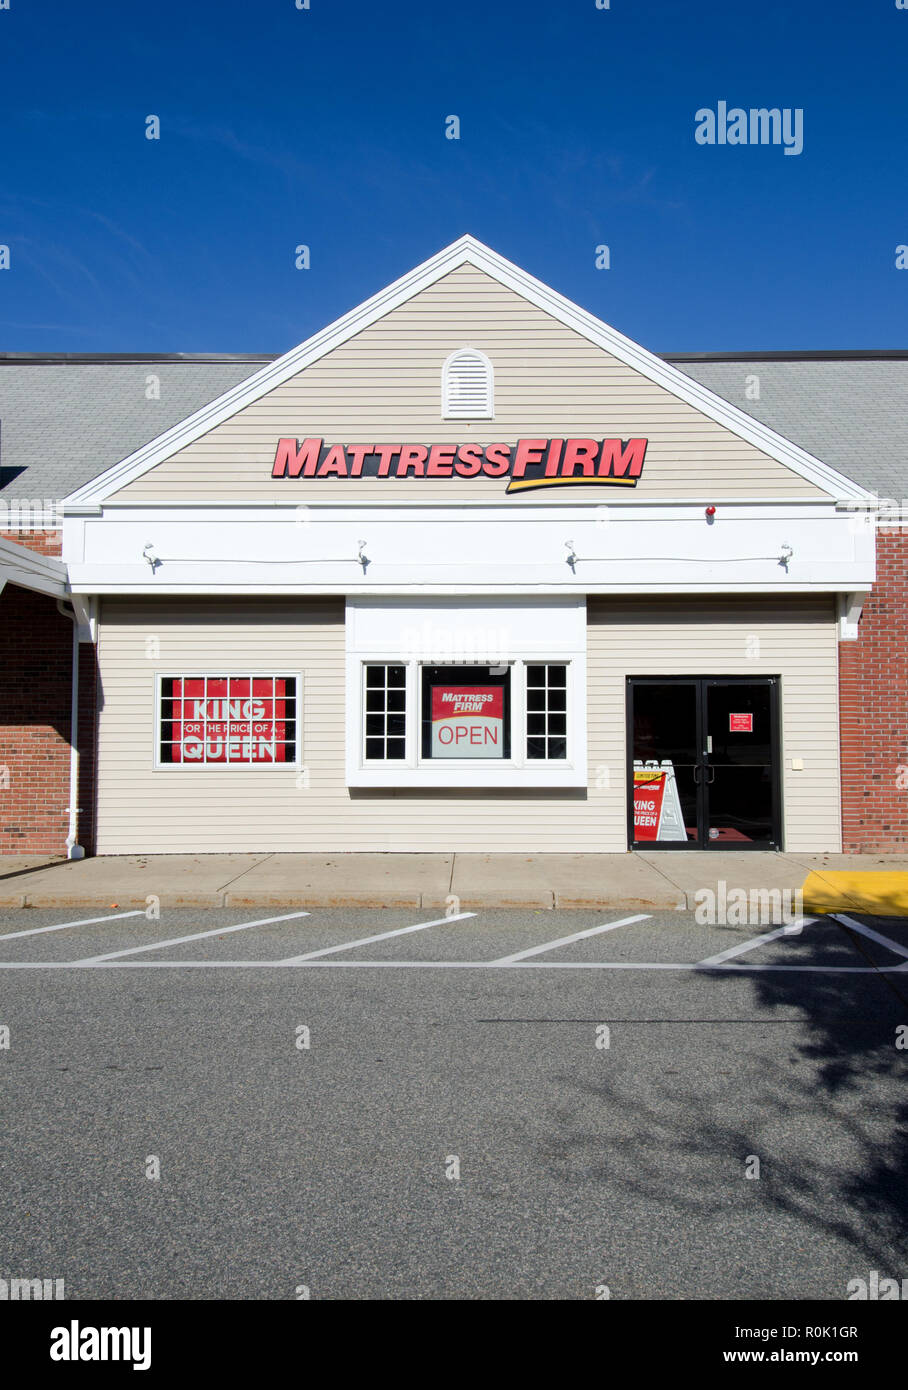 Mattress Firm store exterior in Orleans, Cape Cod, Massachusetts USA with clear blue sky Stock Photo